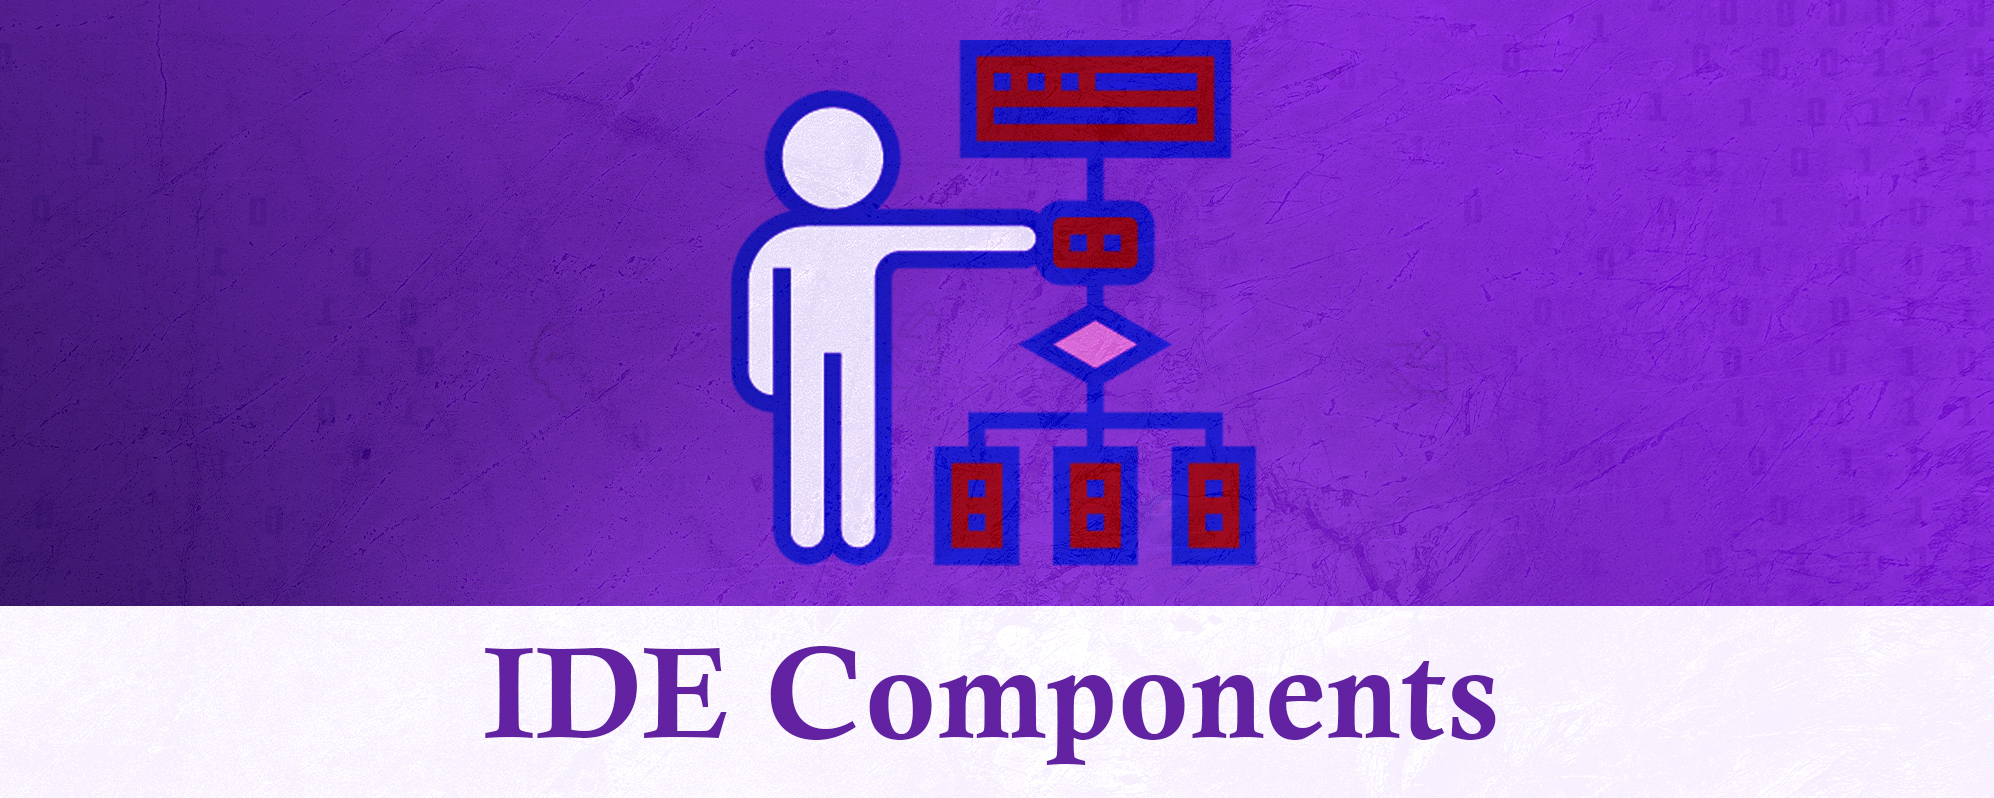 what is IDE, components of ide, ide to run c#, ides to run c#, c# ide, List of C# Ides, IDE Components